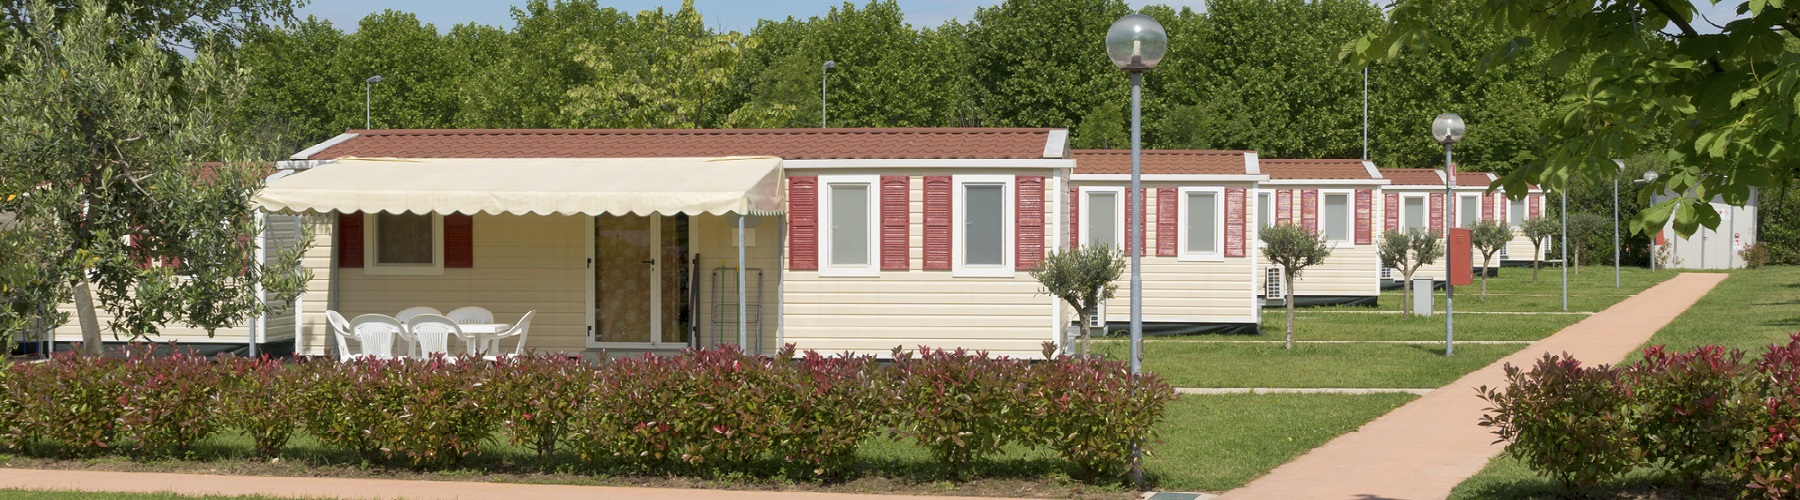 Mobile Home insurance represented by a mobile home park